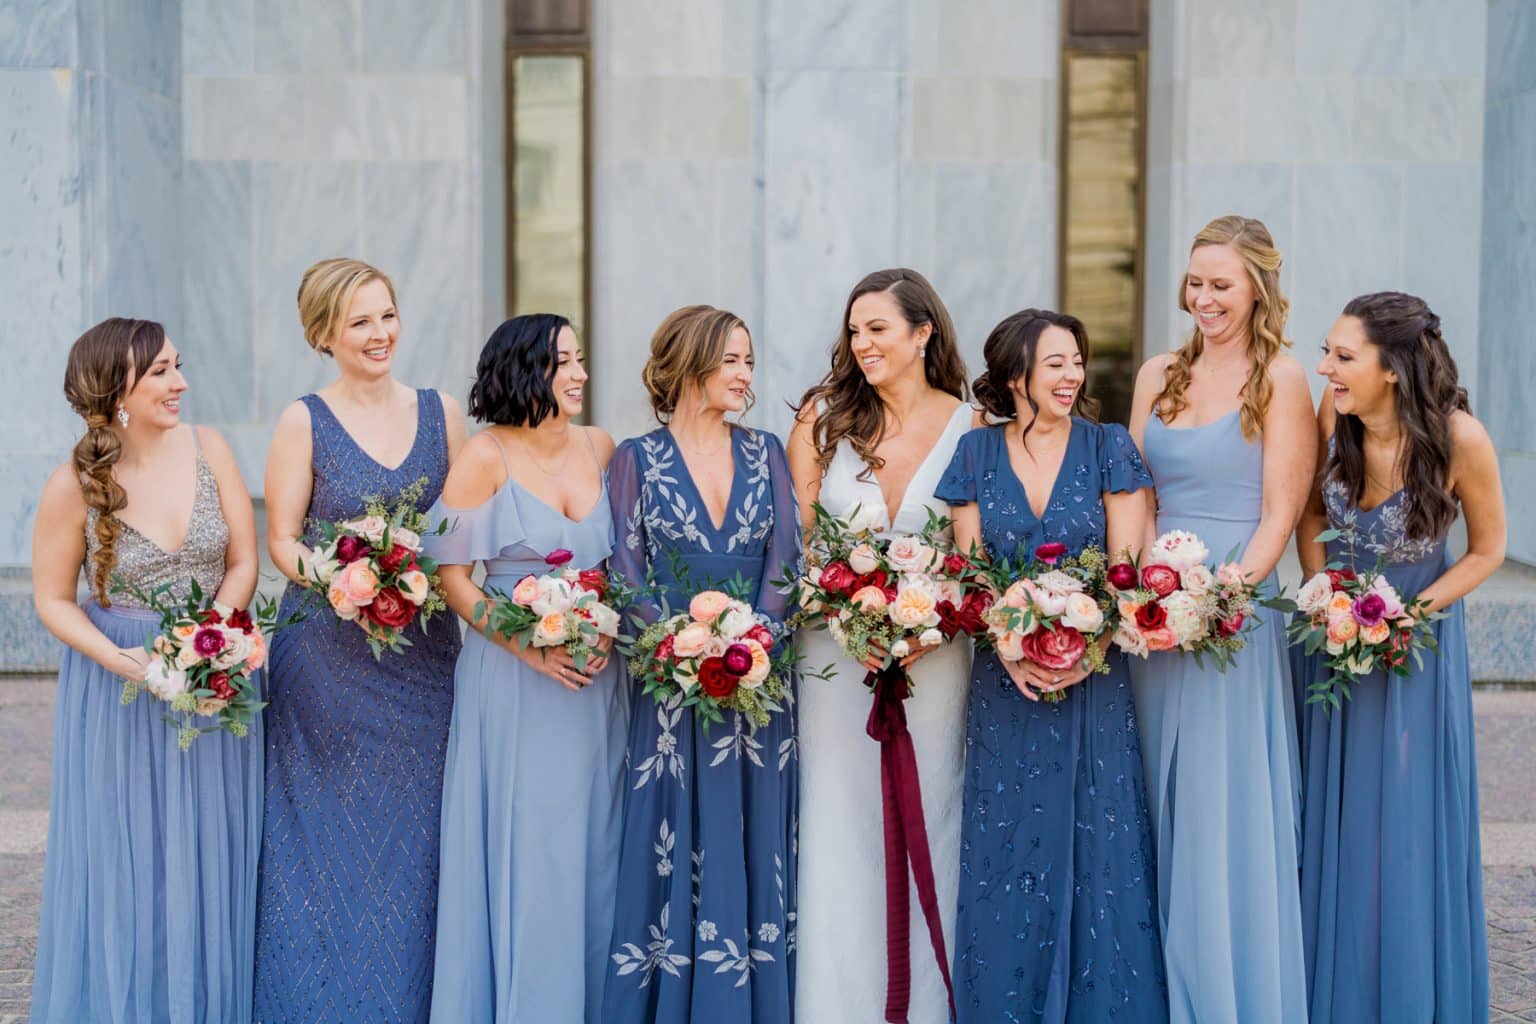 Katy & Kyler’s Wedding at District Winery in Washington, DC | Capitol ...